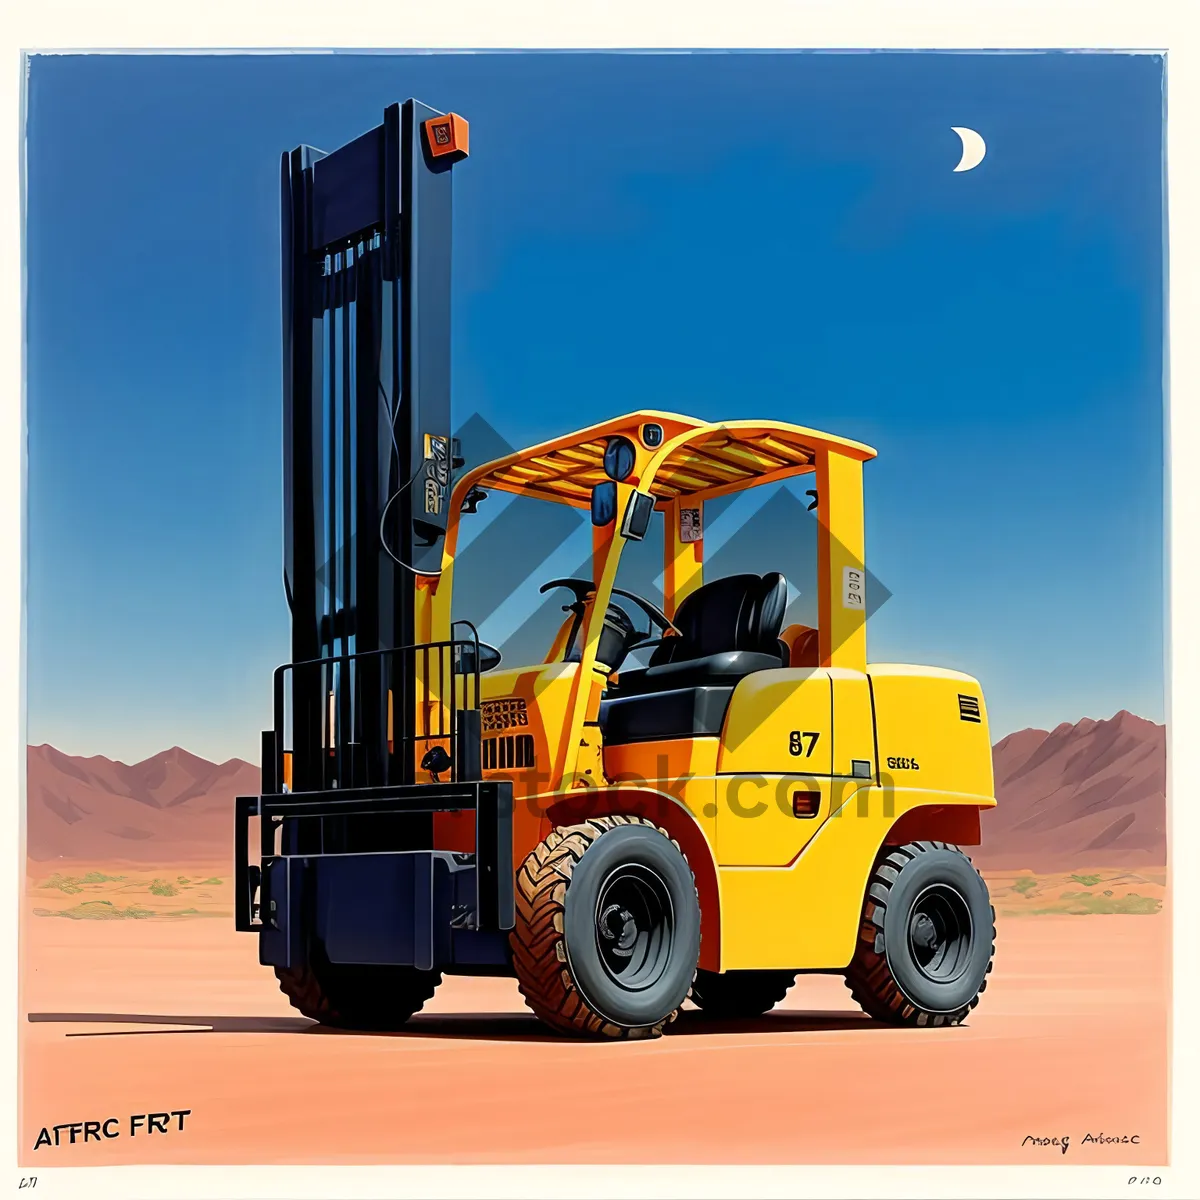 Picture of Yellow Heavy Equipment Loader at Construction Site